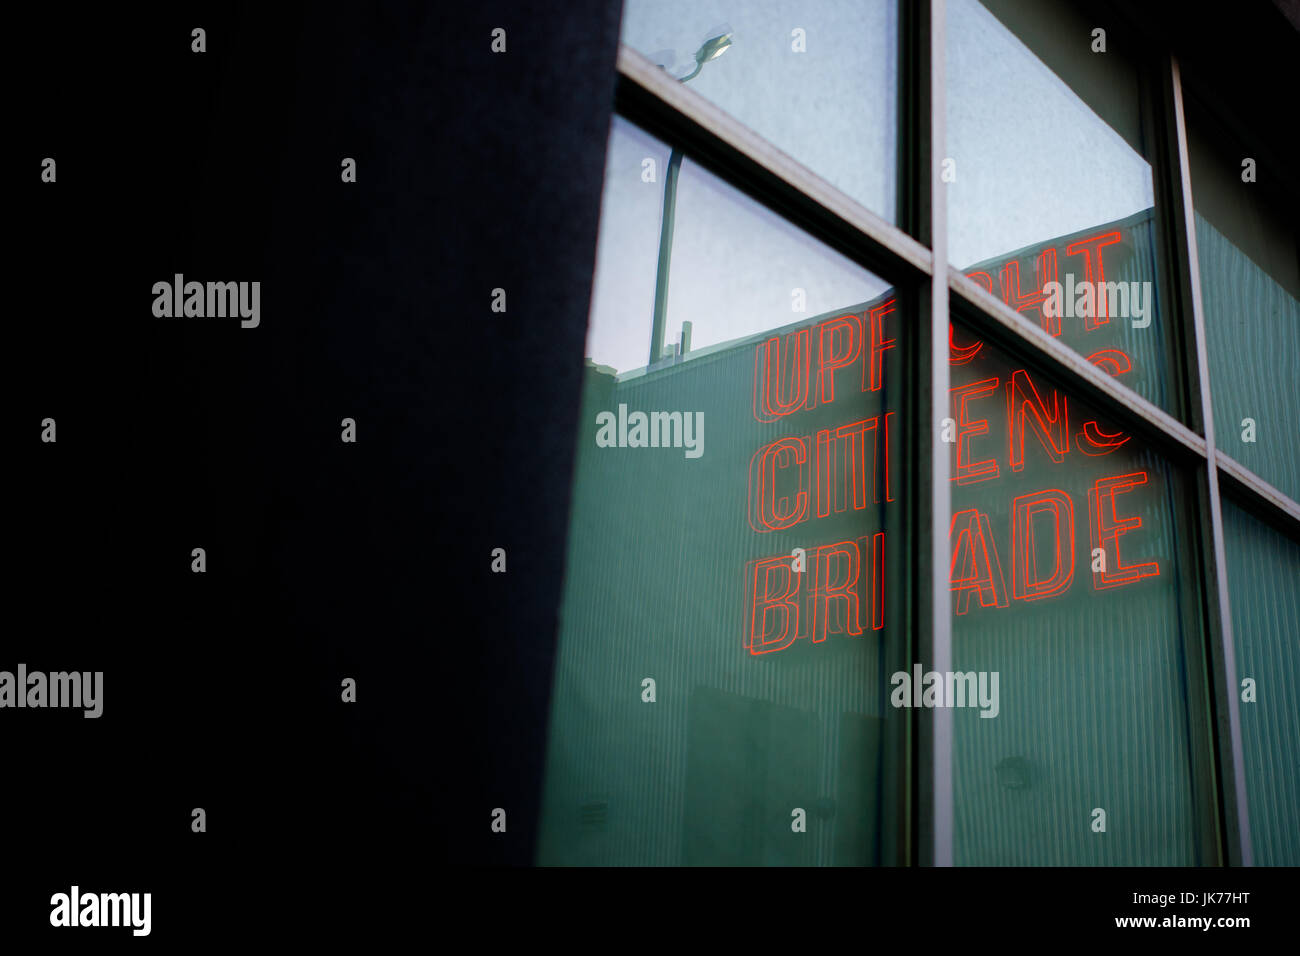 Upright Citizens Brigade sign reflected in window at dusk, in Hollywood, Los Angeles California. Stock Photo